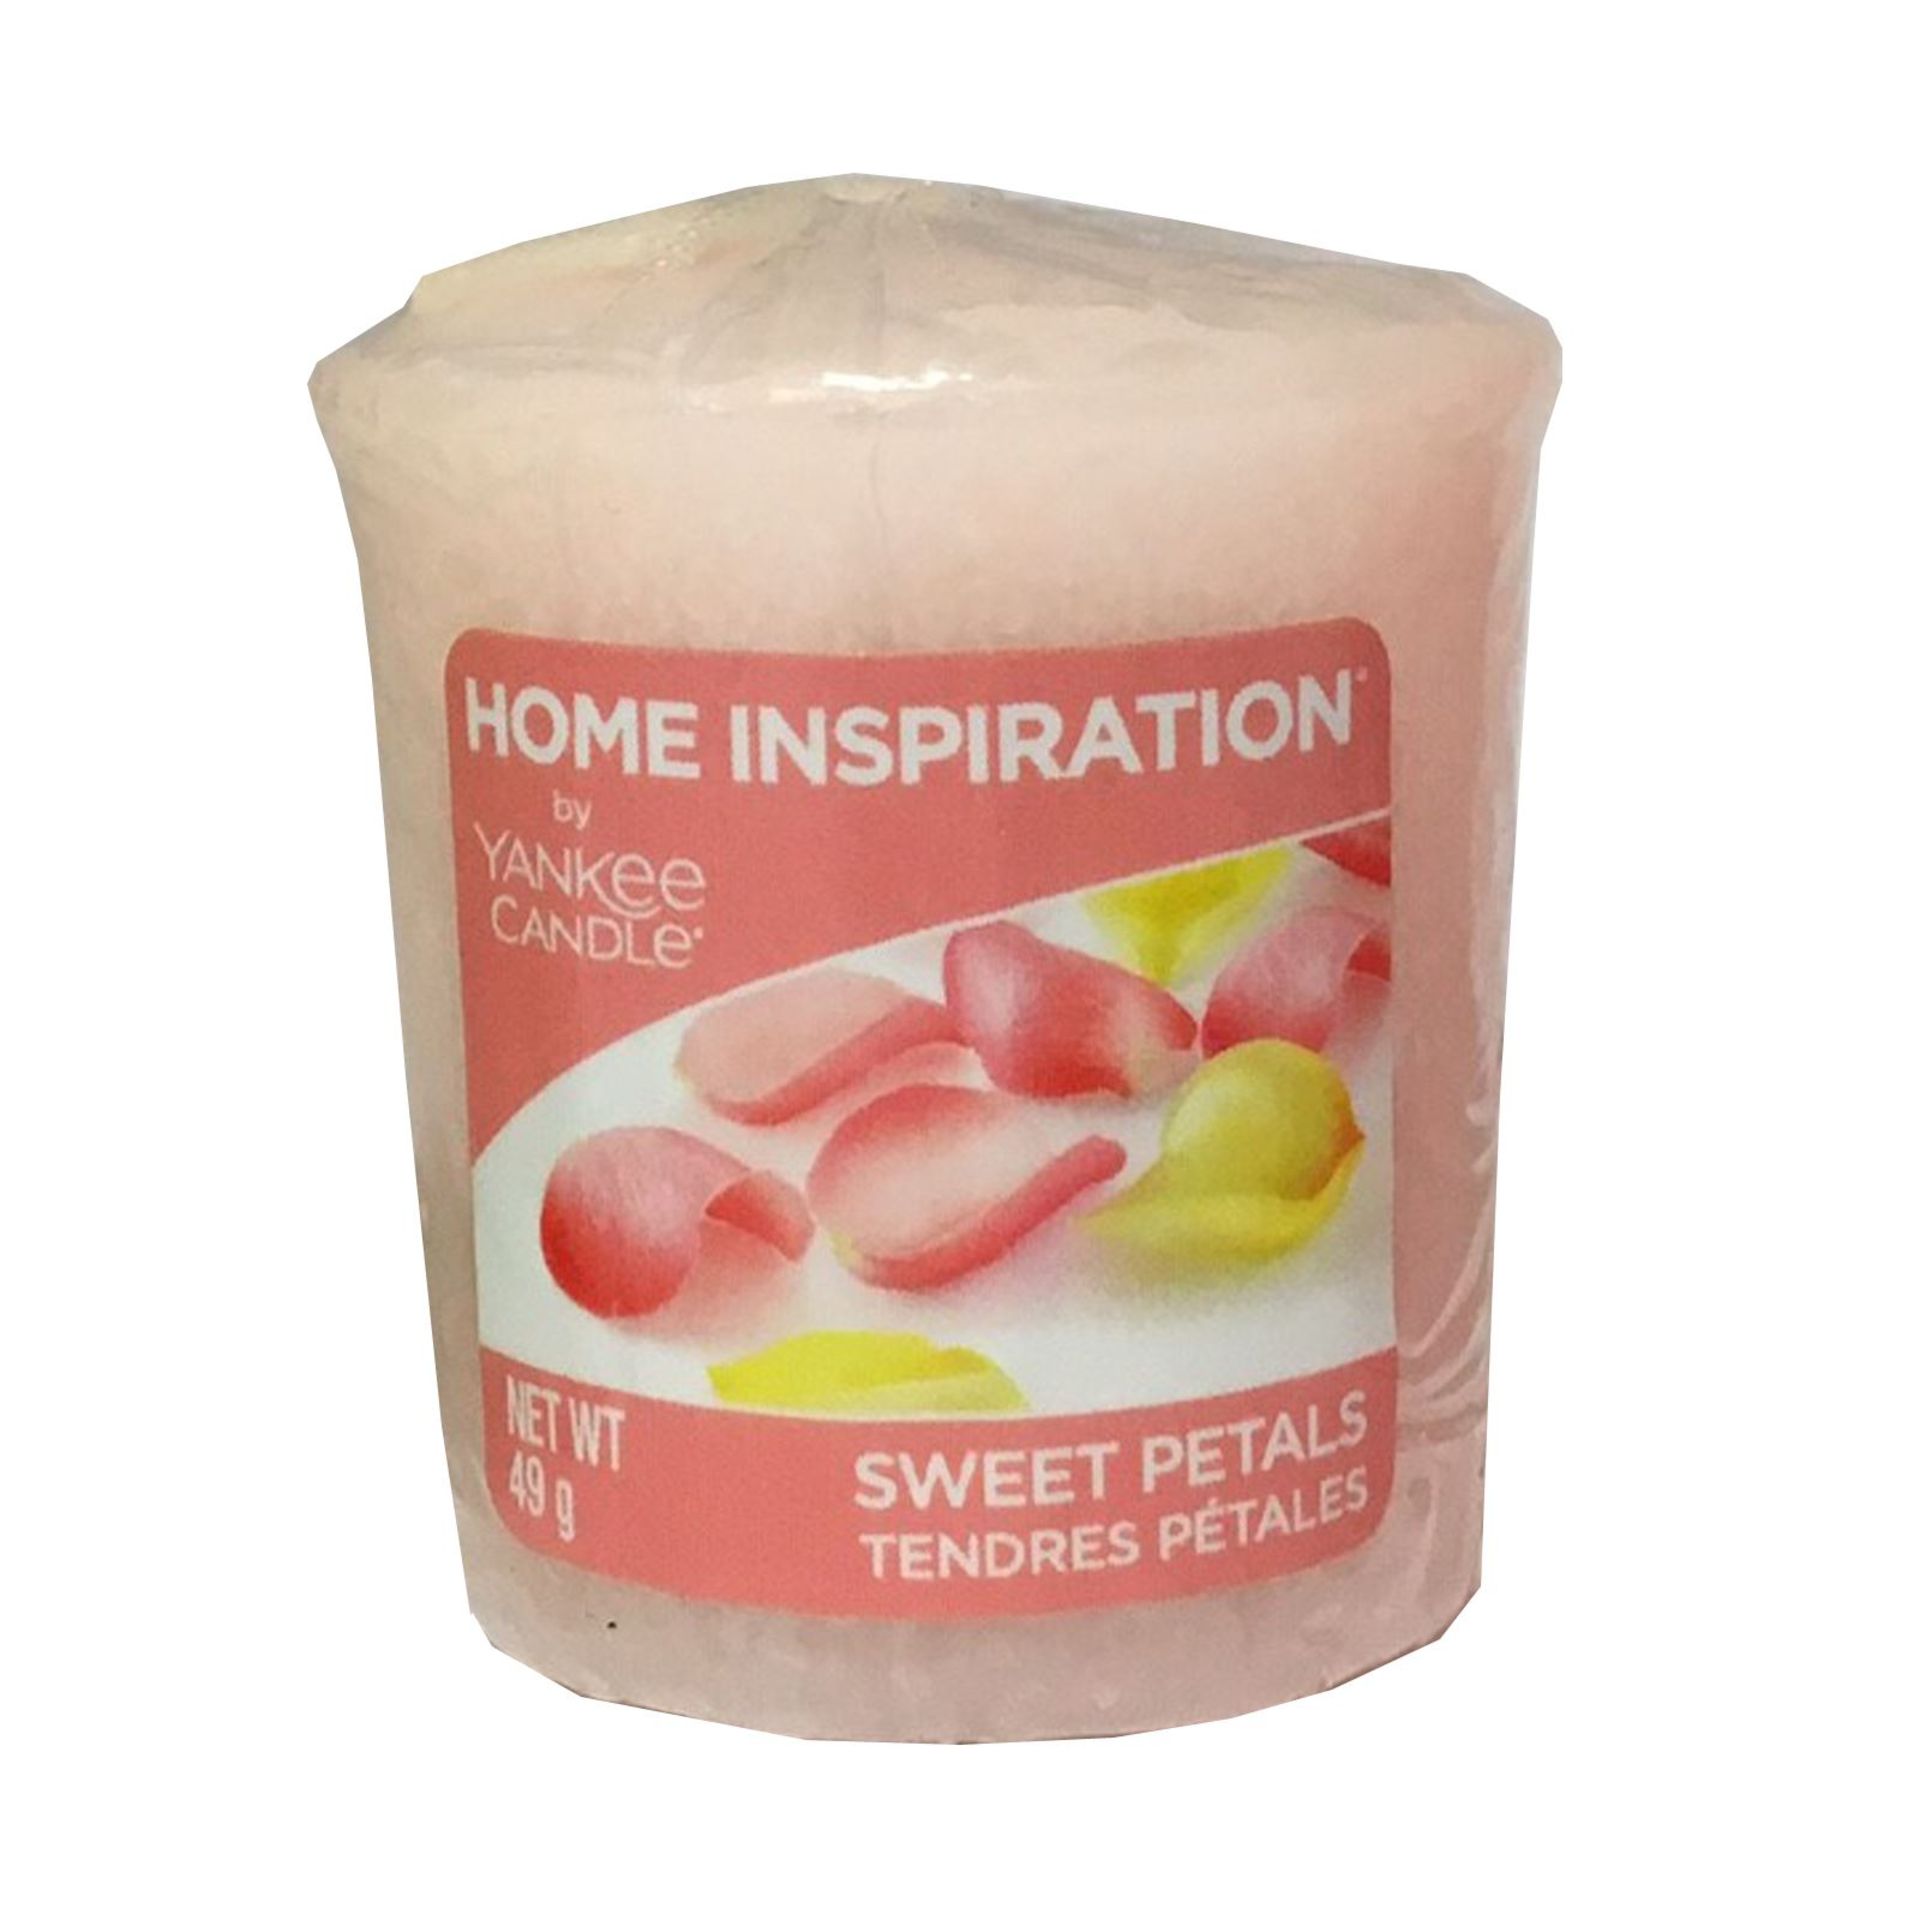 V Brand New 18 X Yankee Candle Votive Sweet Petals - eBay Price £107.82 - Image 2 of 2